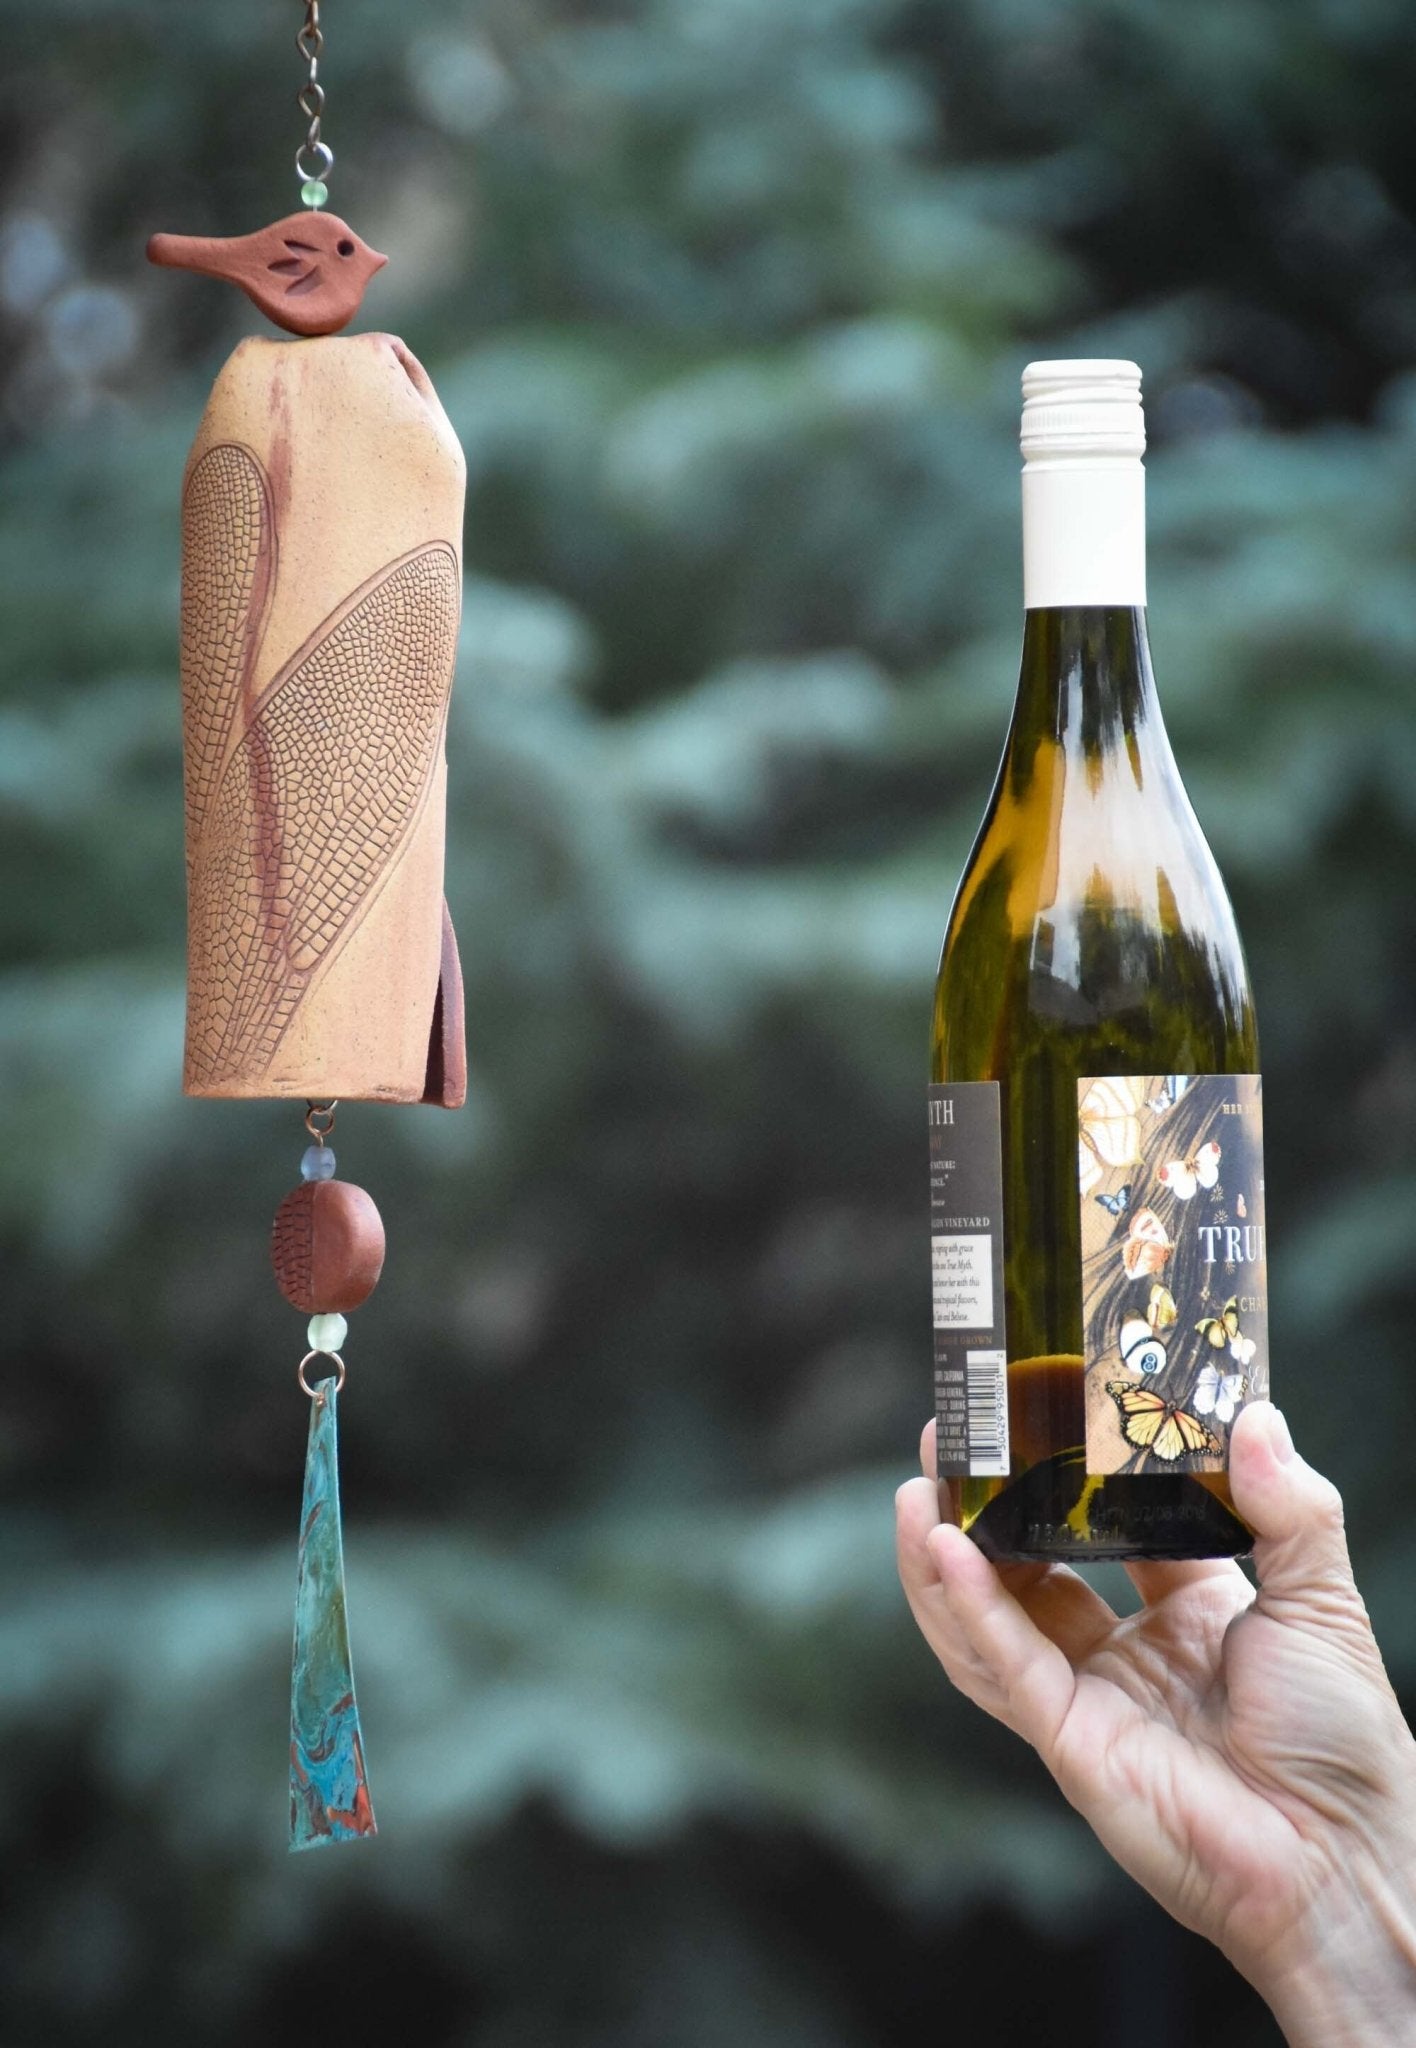 Dragonfly Wind Chime for Outdoors - EarthWind Bells